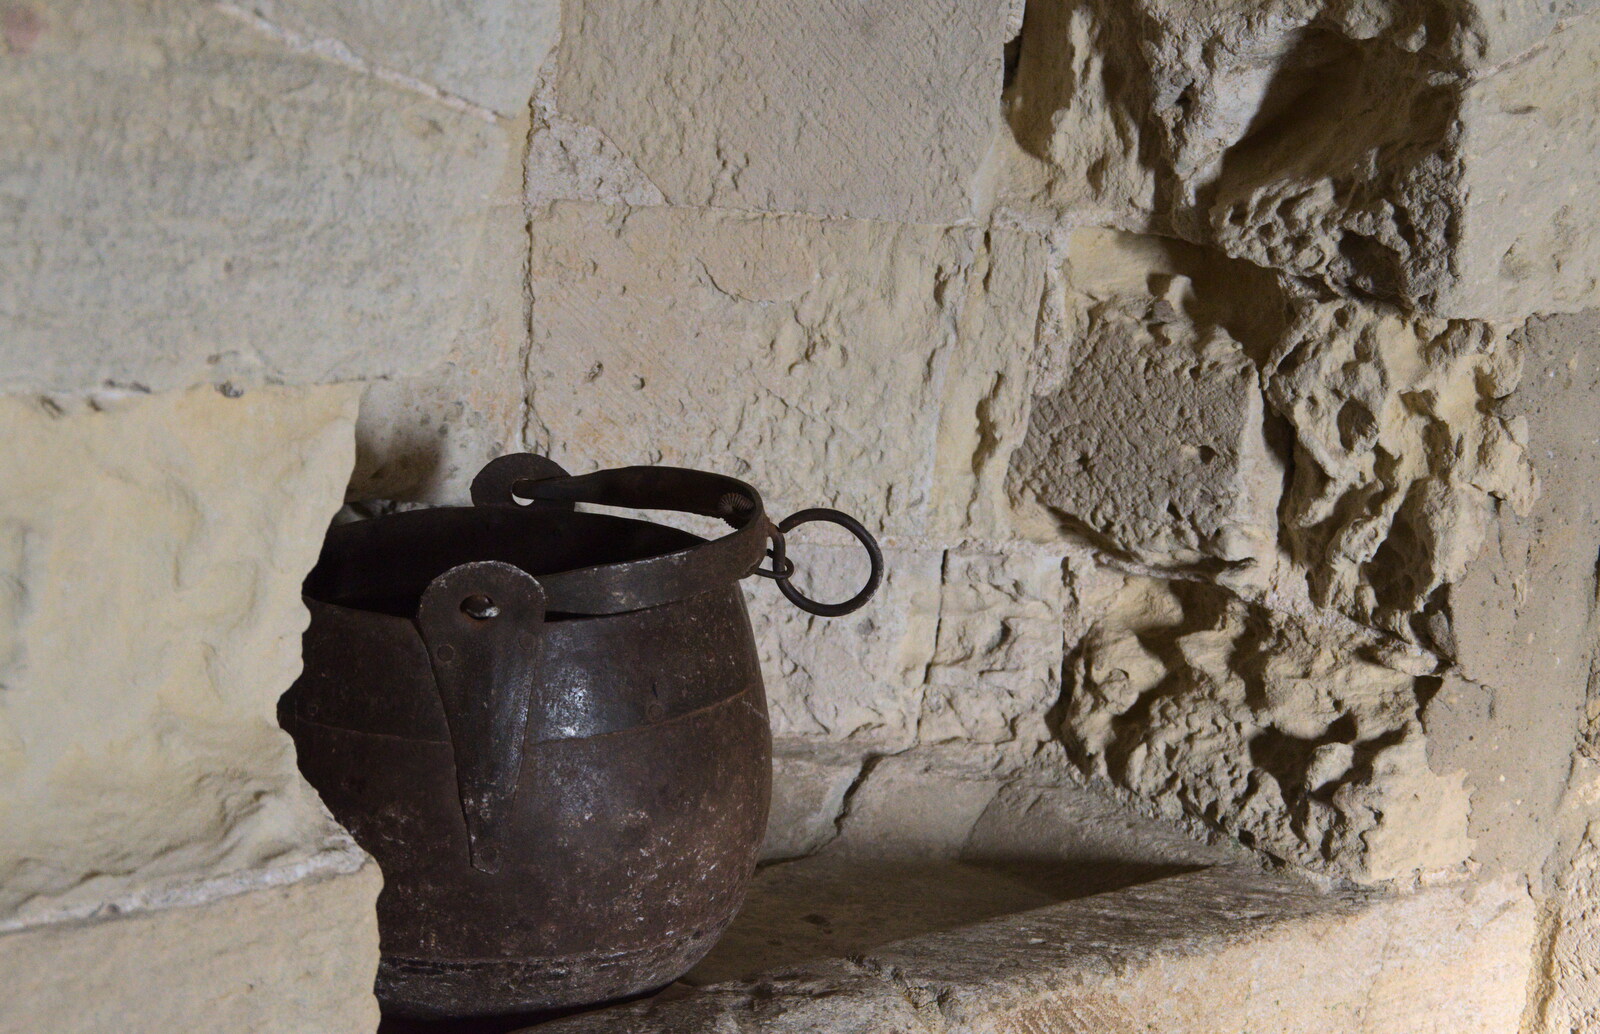 A Trip to Orford, Suffolk - 25th January 2020: An iron pot in an alcove